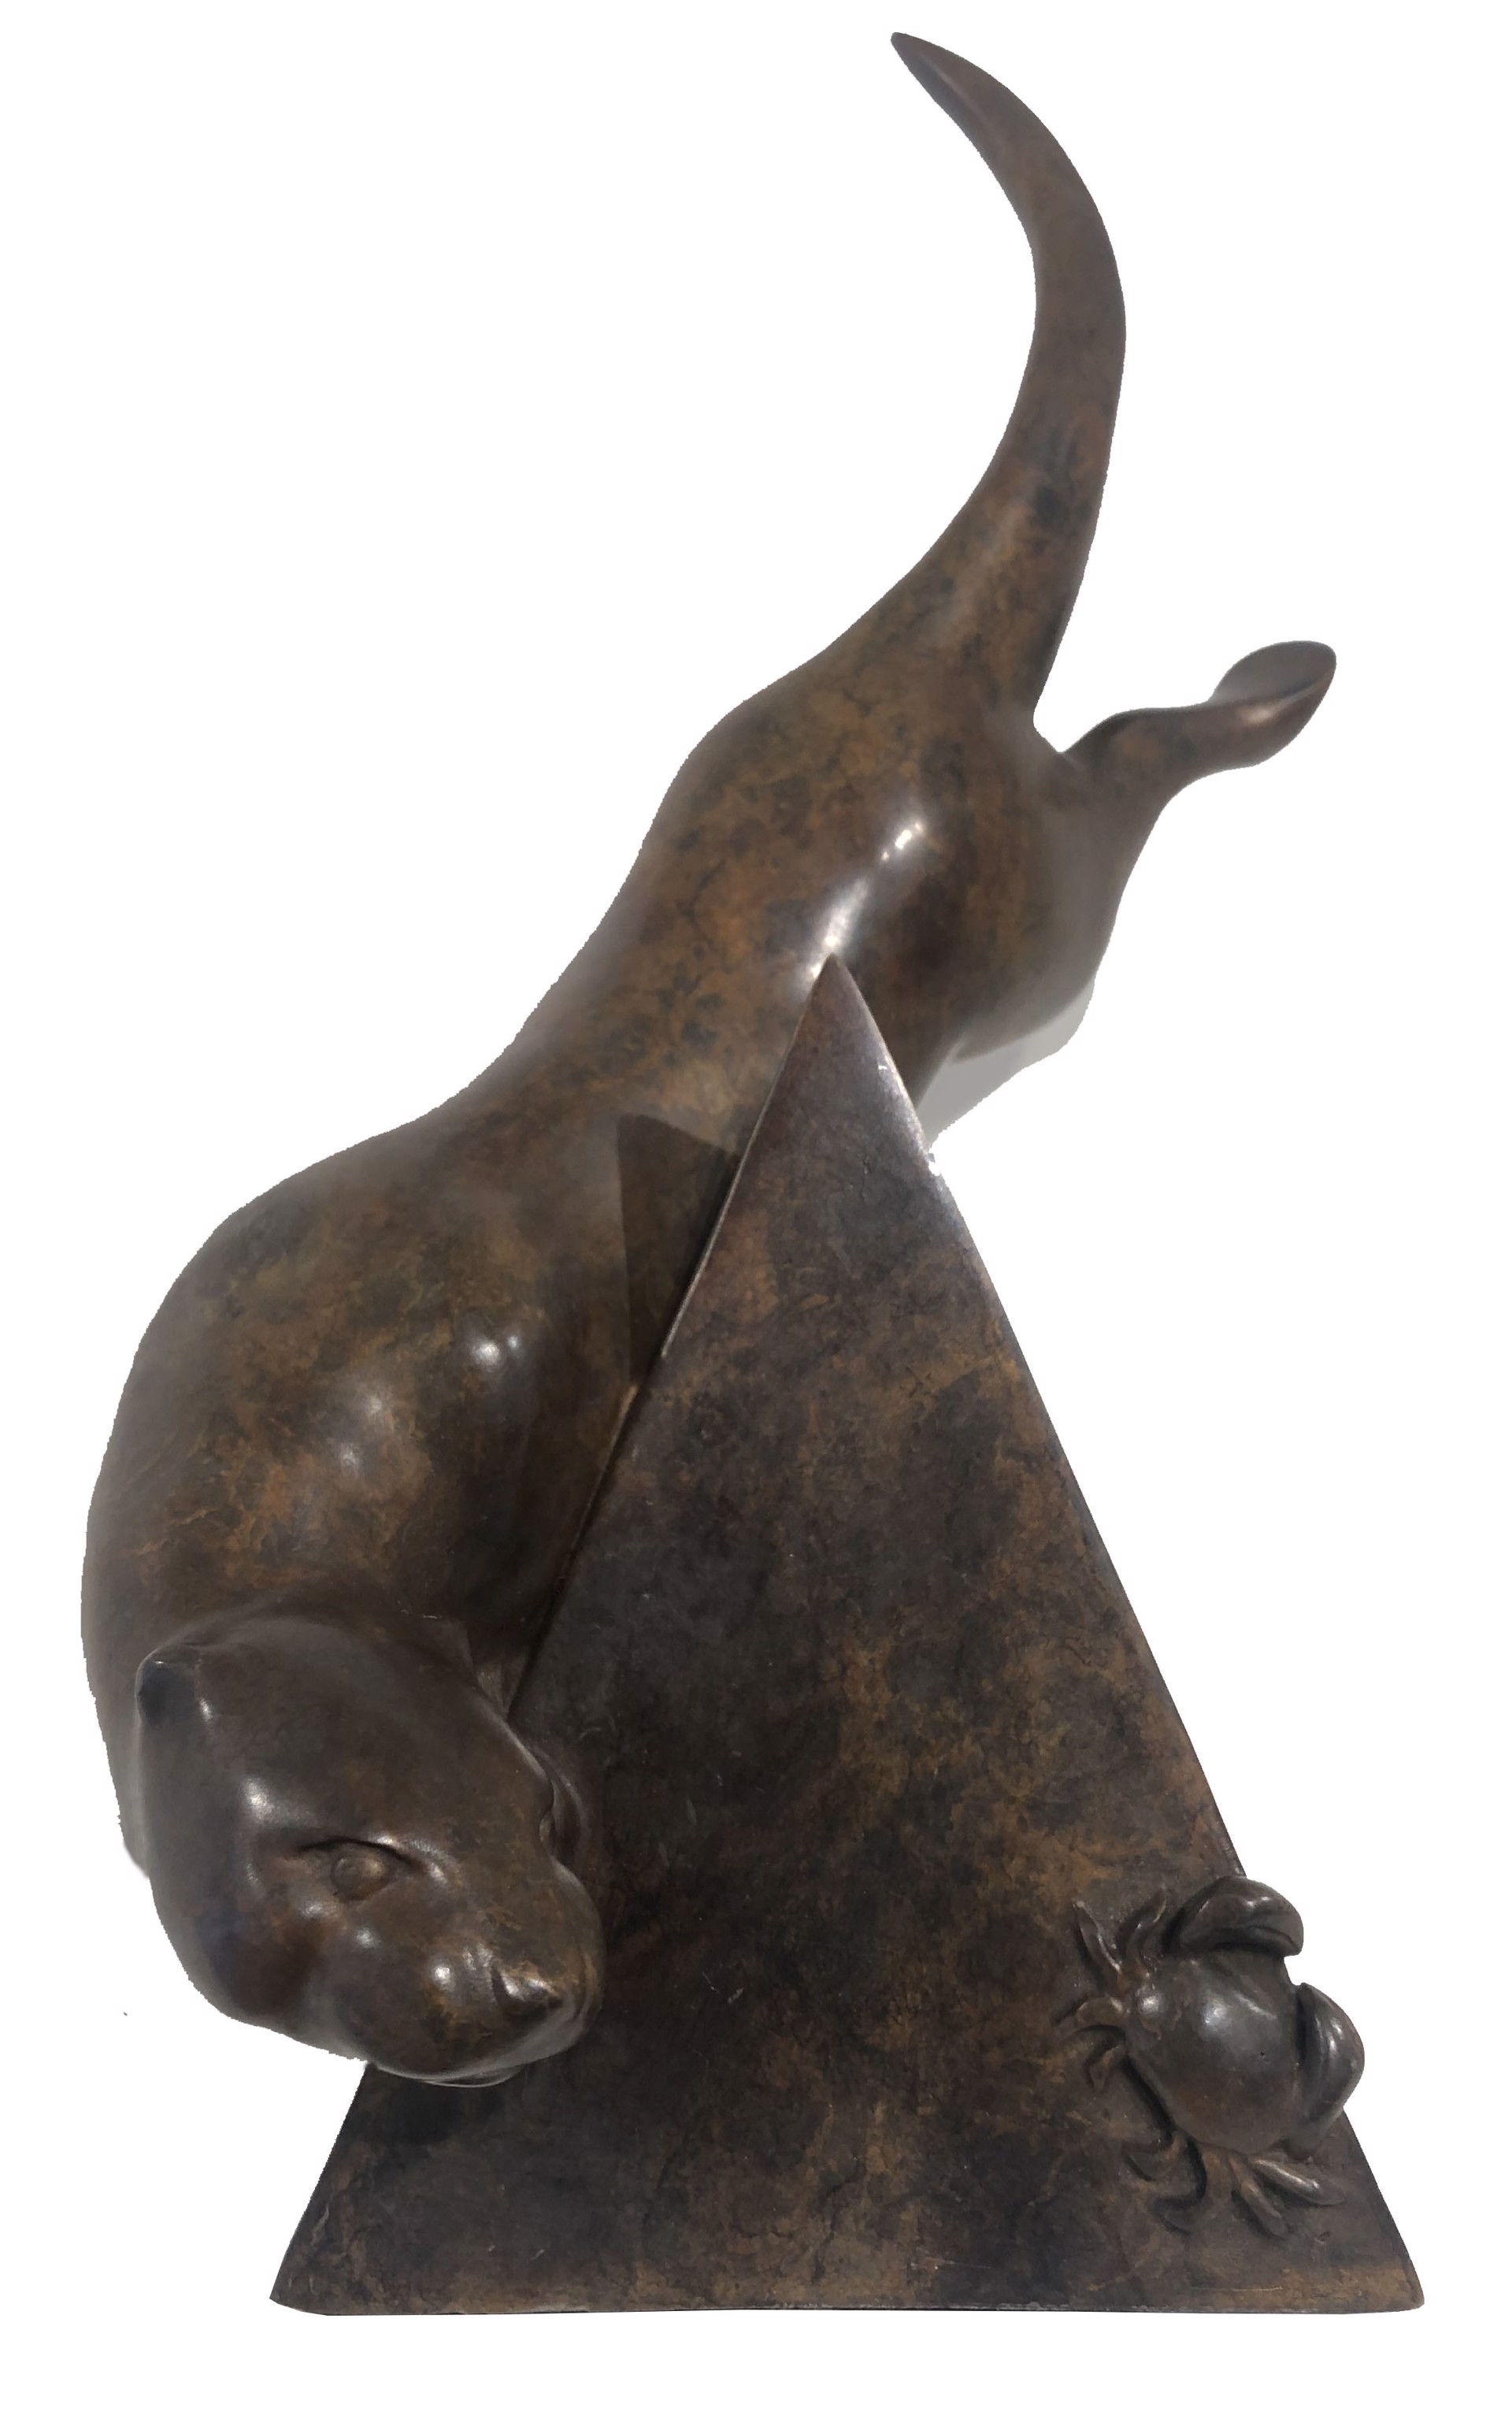 A Contemporary Bronze Of An Otter Catching A Crab Around A Triangle By Kristine Taylor At Gallery Wild